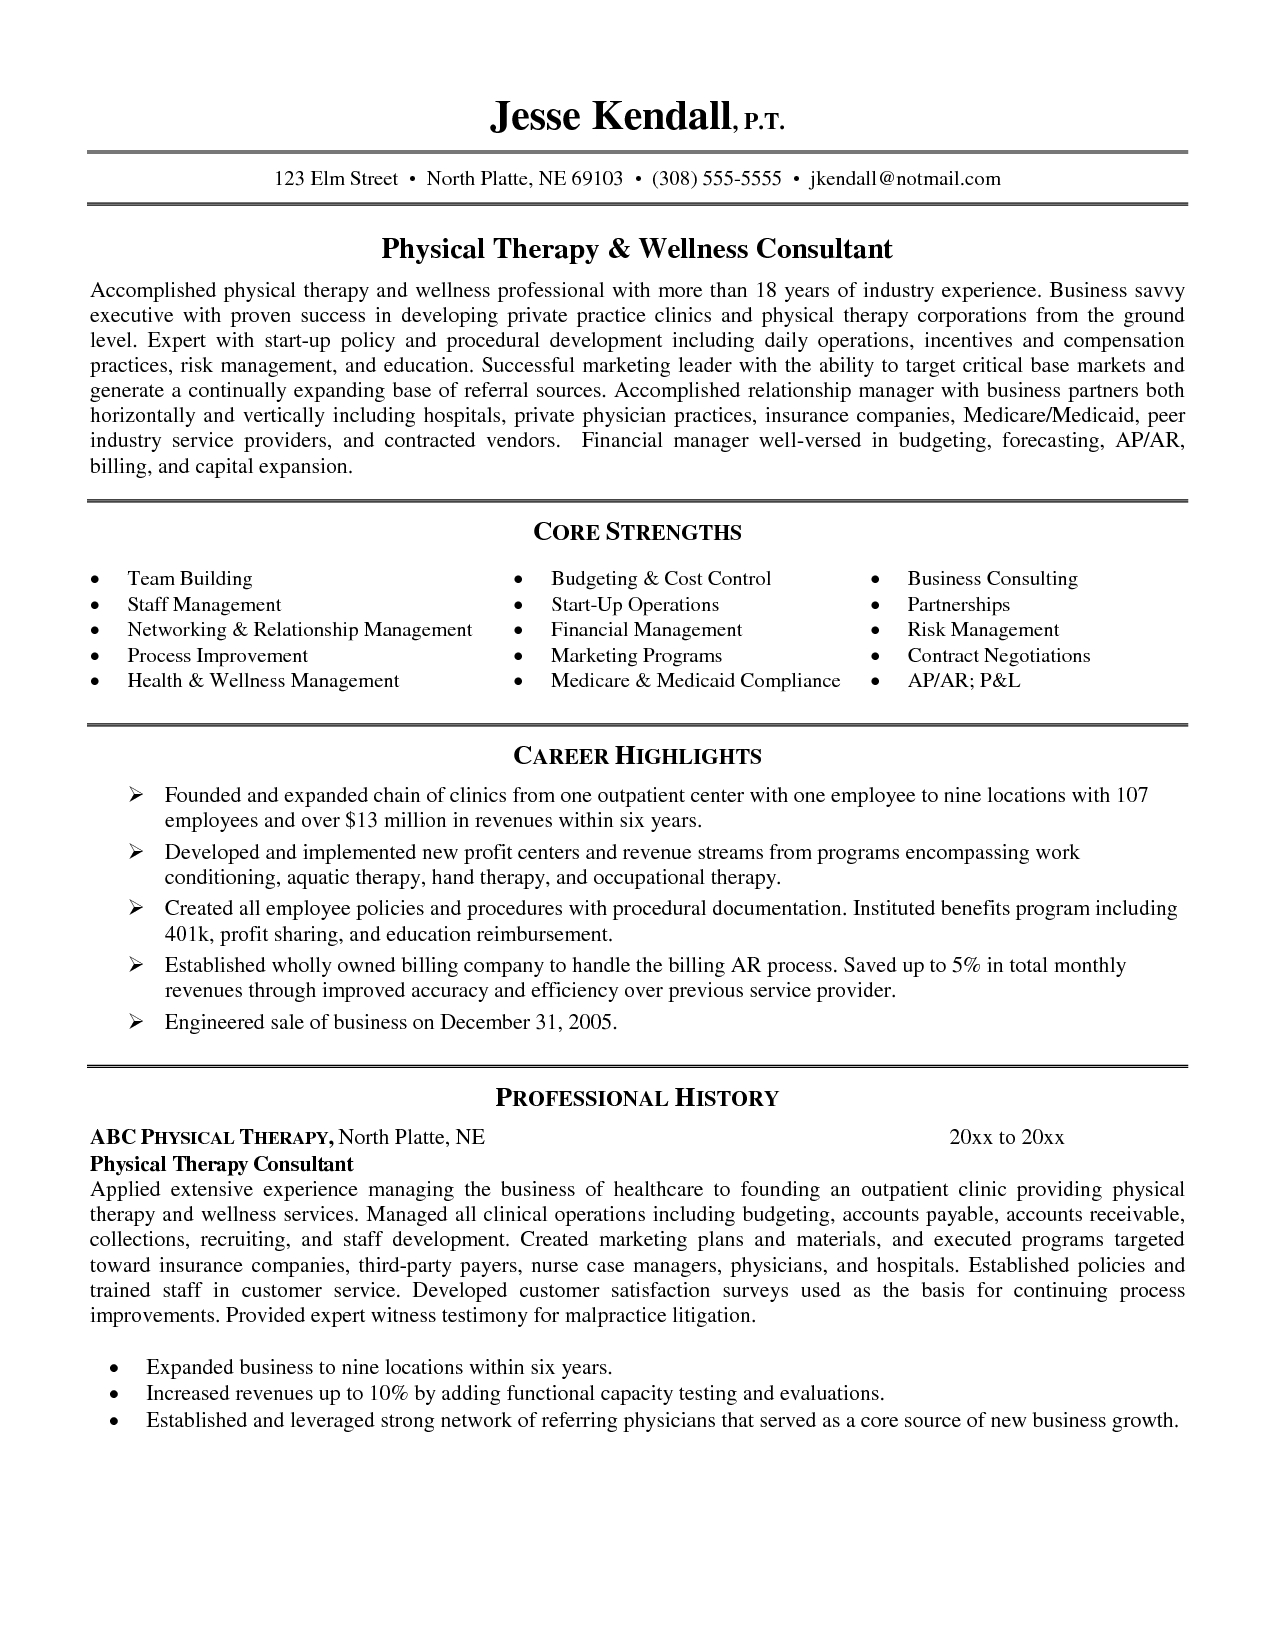 Physical therapy Cover Letter Template - Massage therapy Resumes Samples Roddyschrock